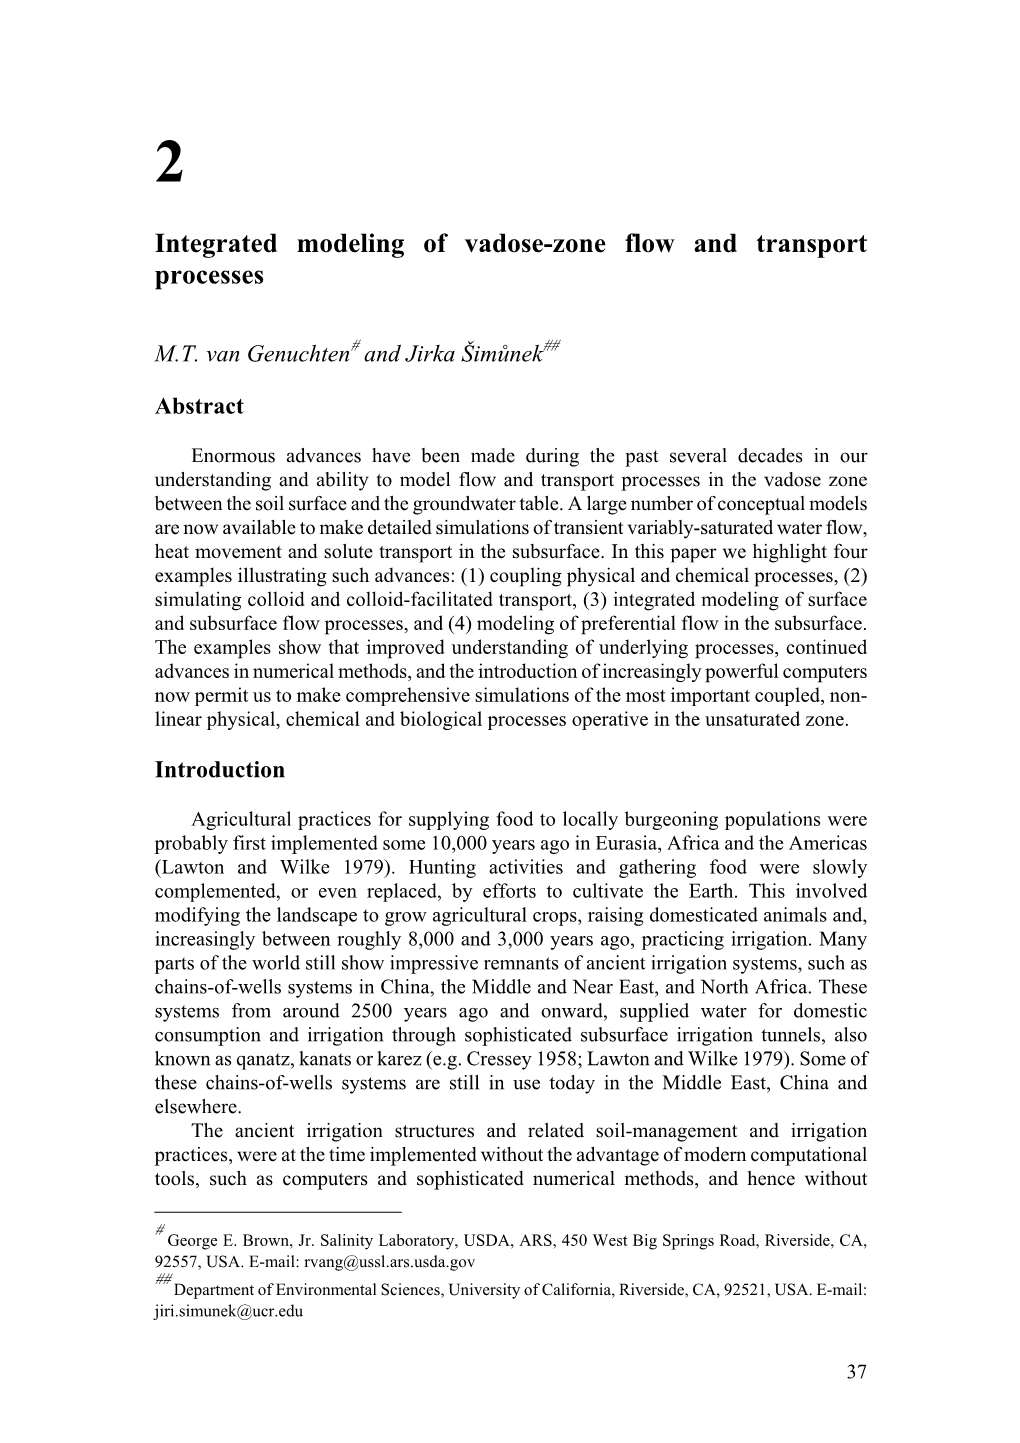 Integrated Modeling of Vadose-Zone Flow and Transport Processes